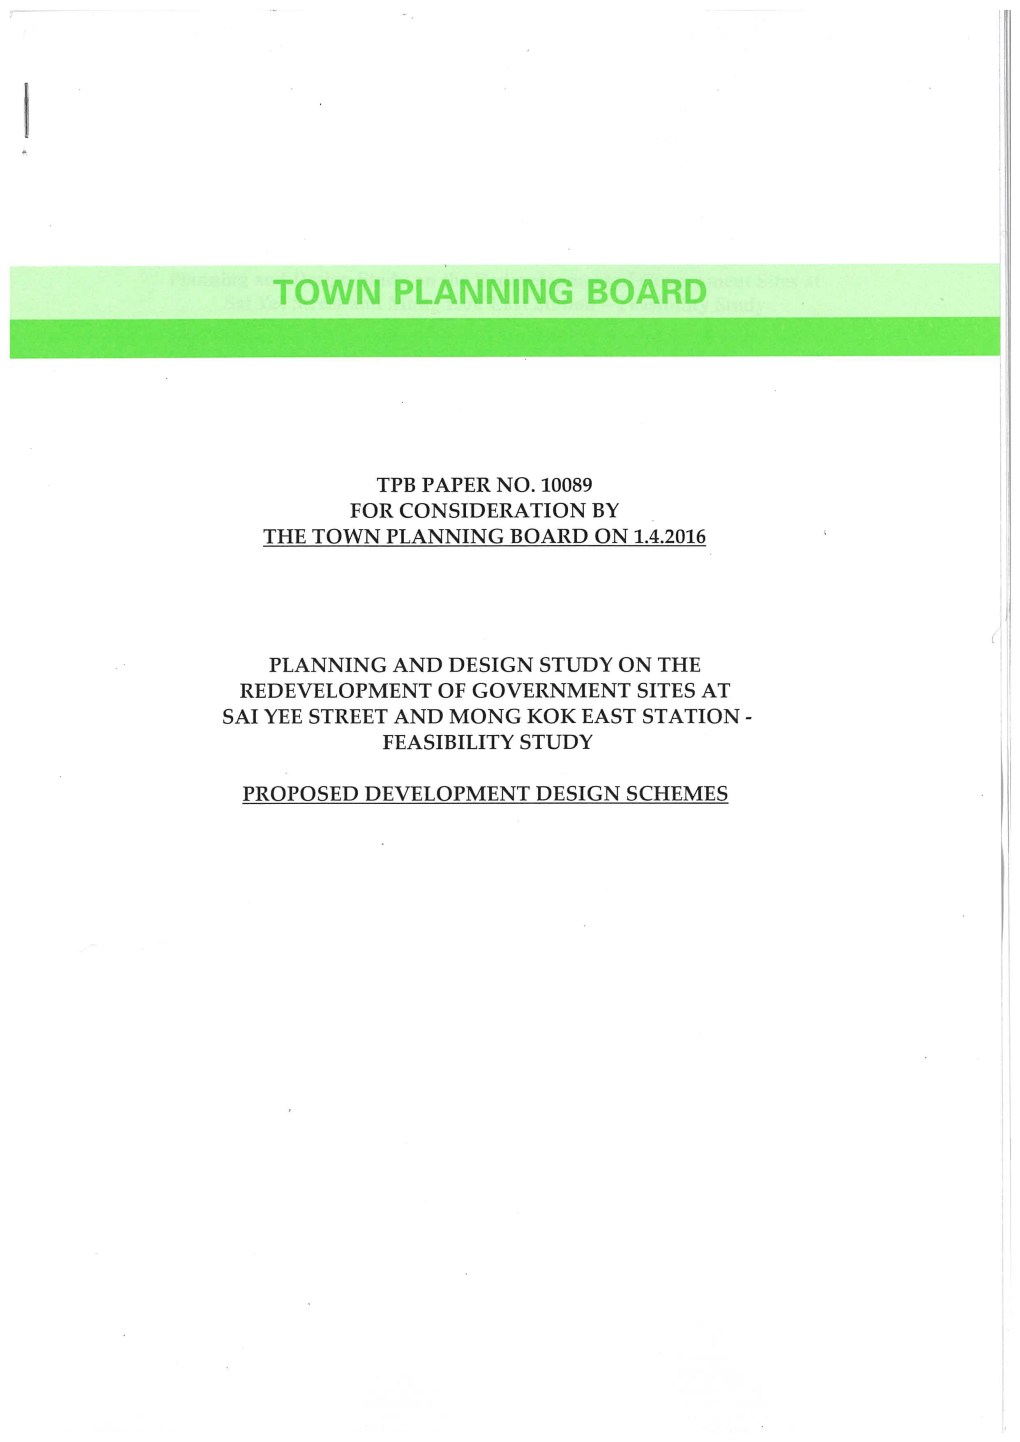 TPB Paper No.10089 for Consideration by the Town Planning Board on 1.4.2016